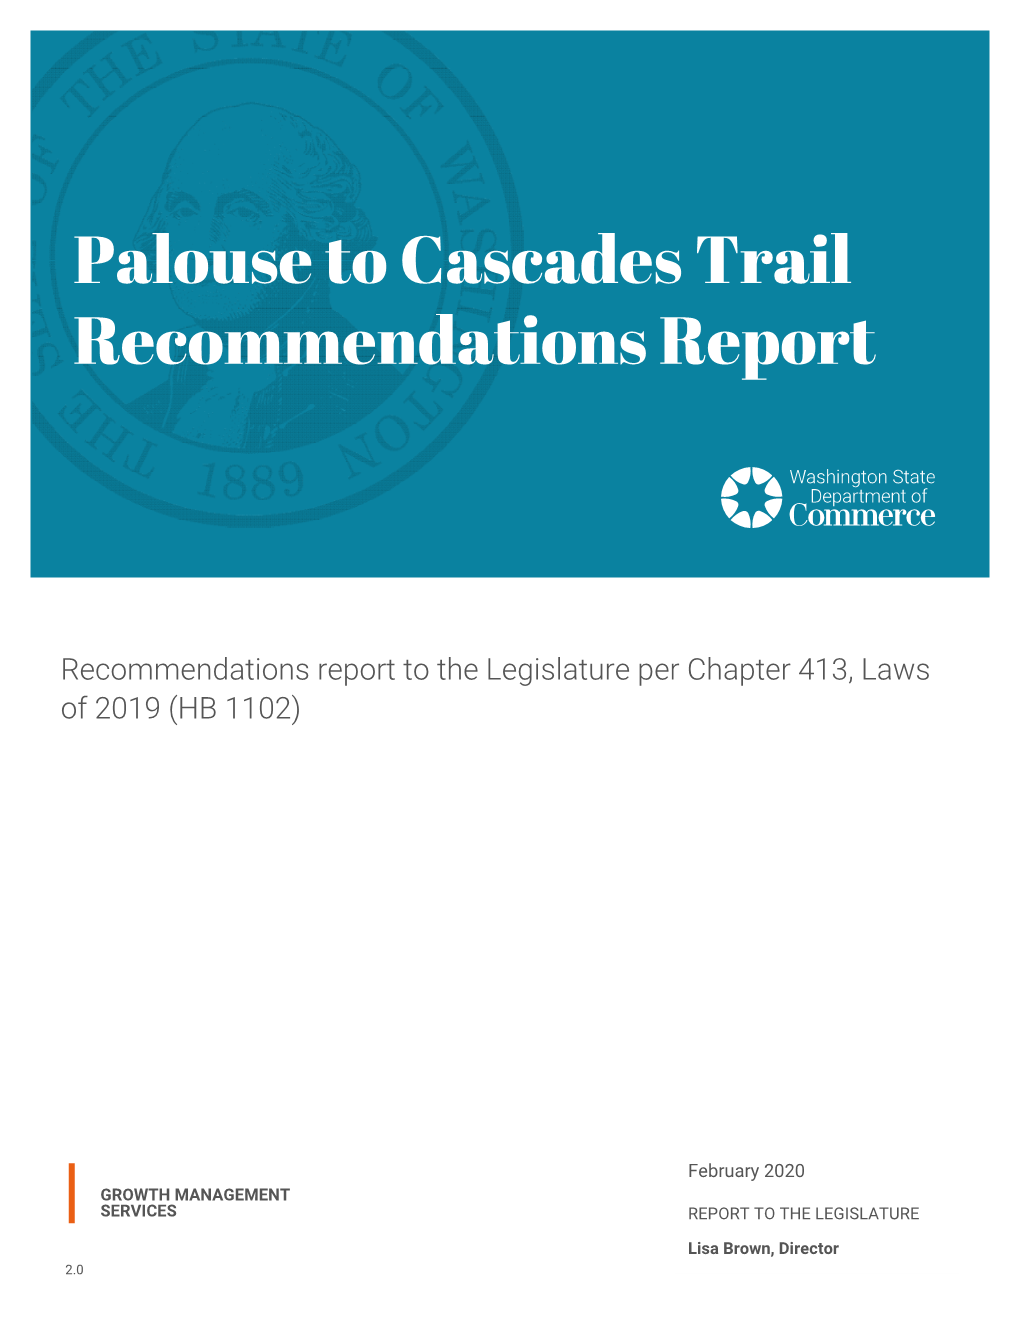 Palouse to Cascades Trail Recommendations Report